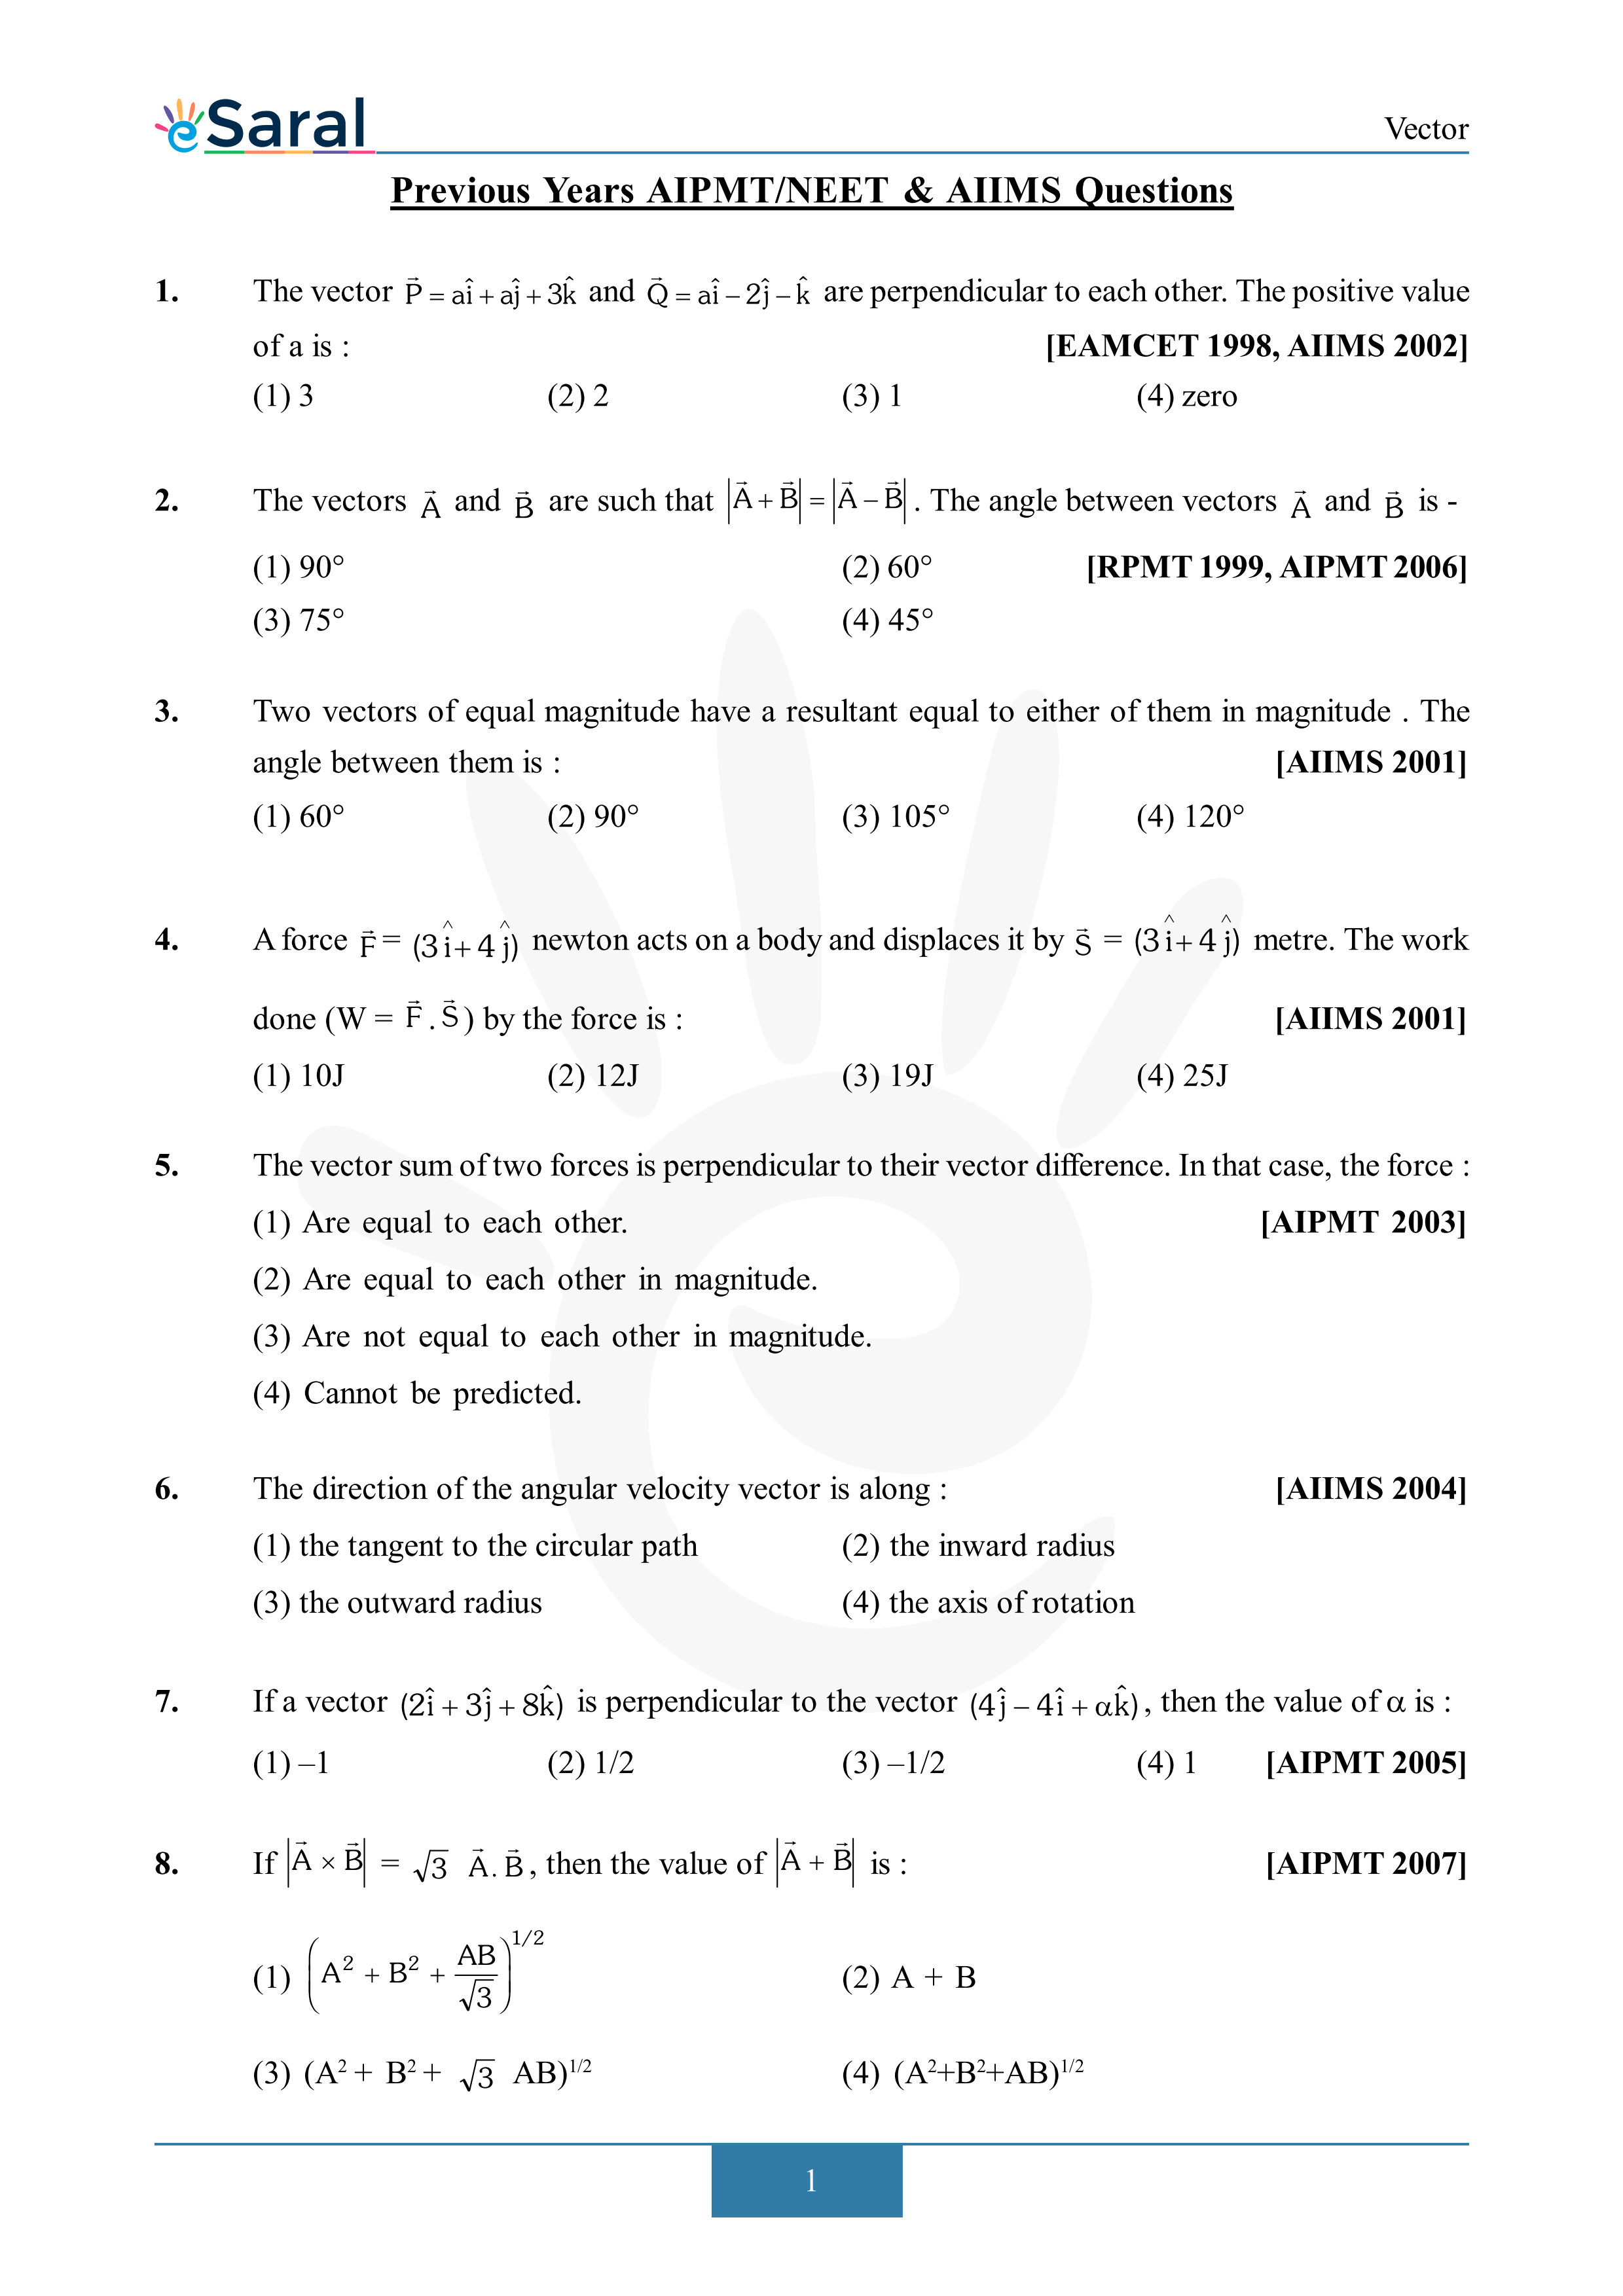 neet-vector-previous-year-questions-with-solutions